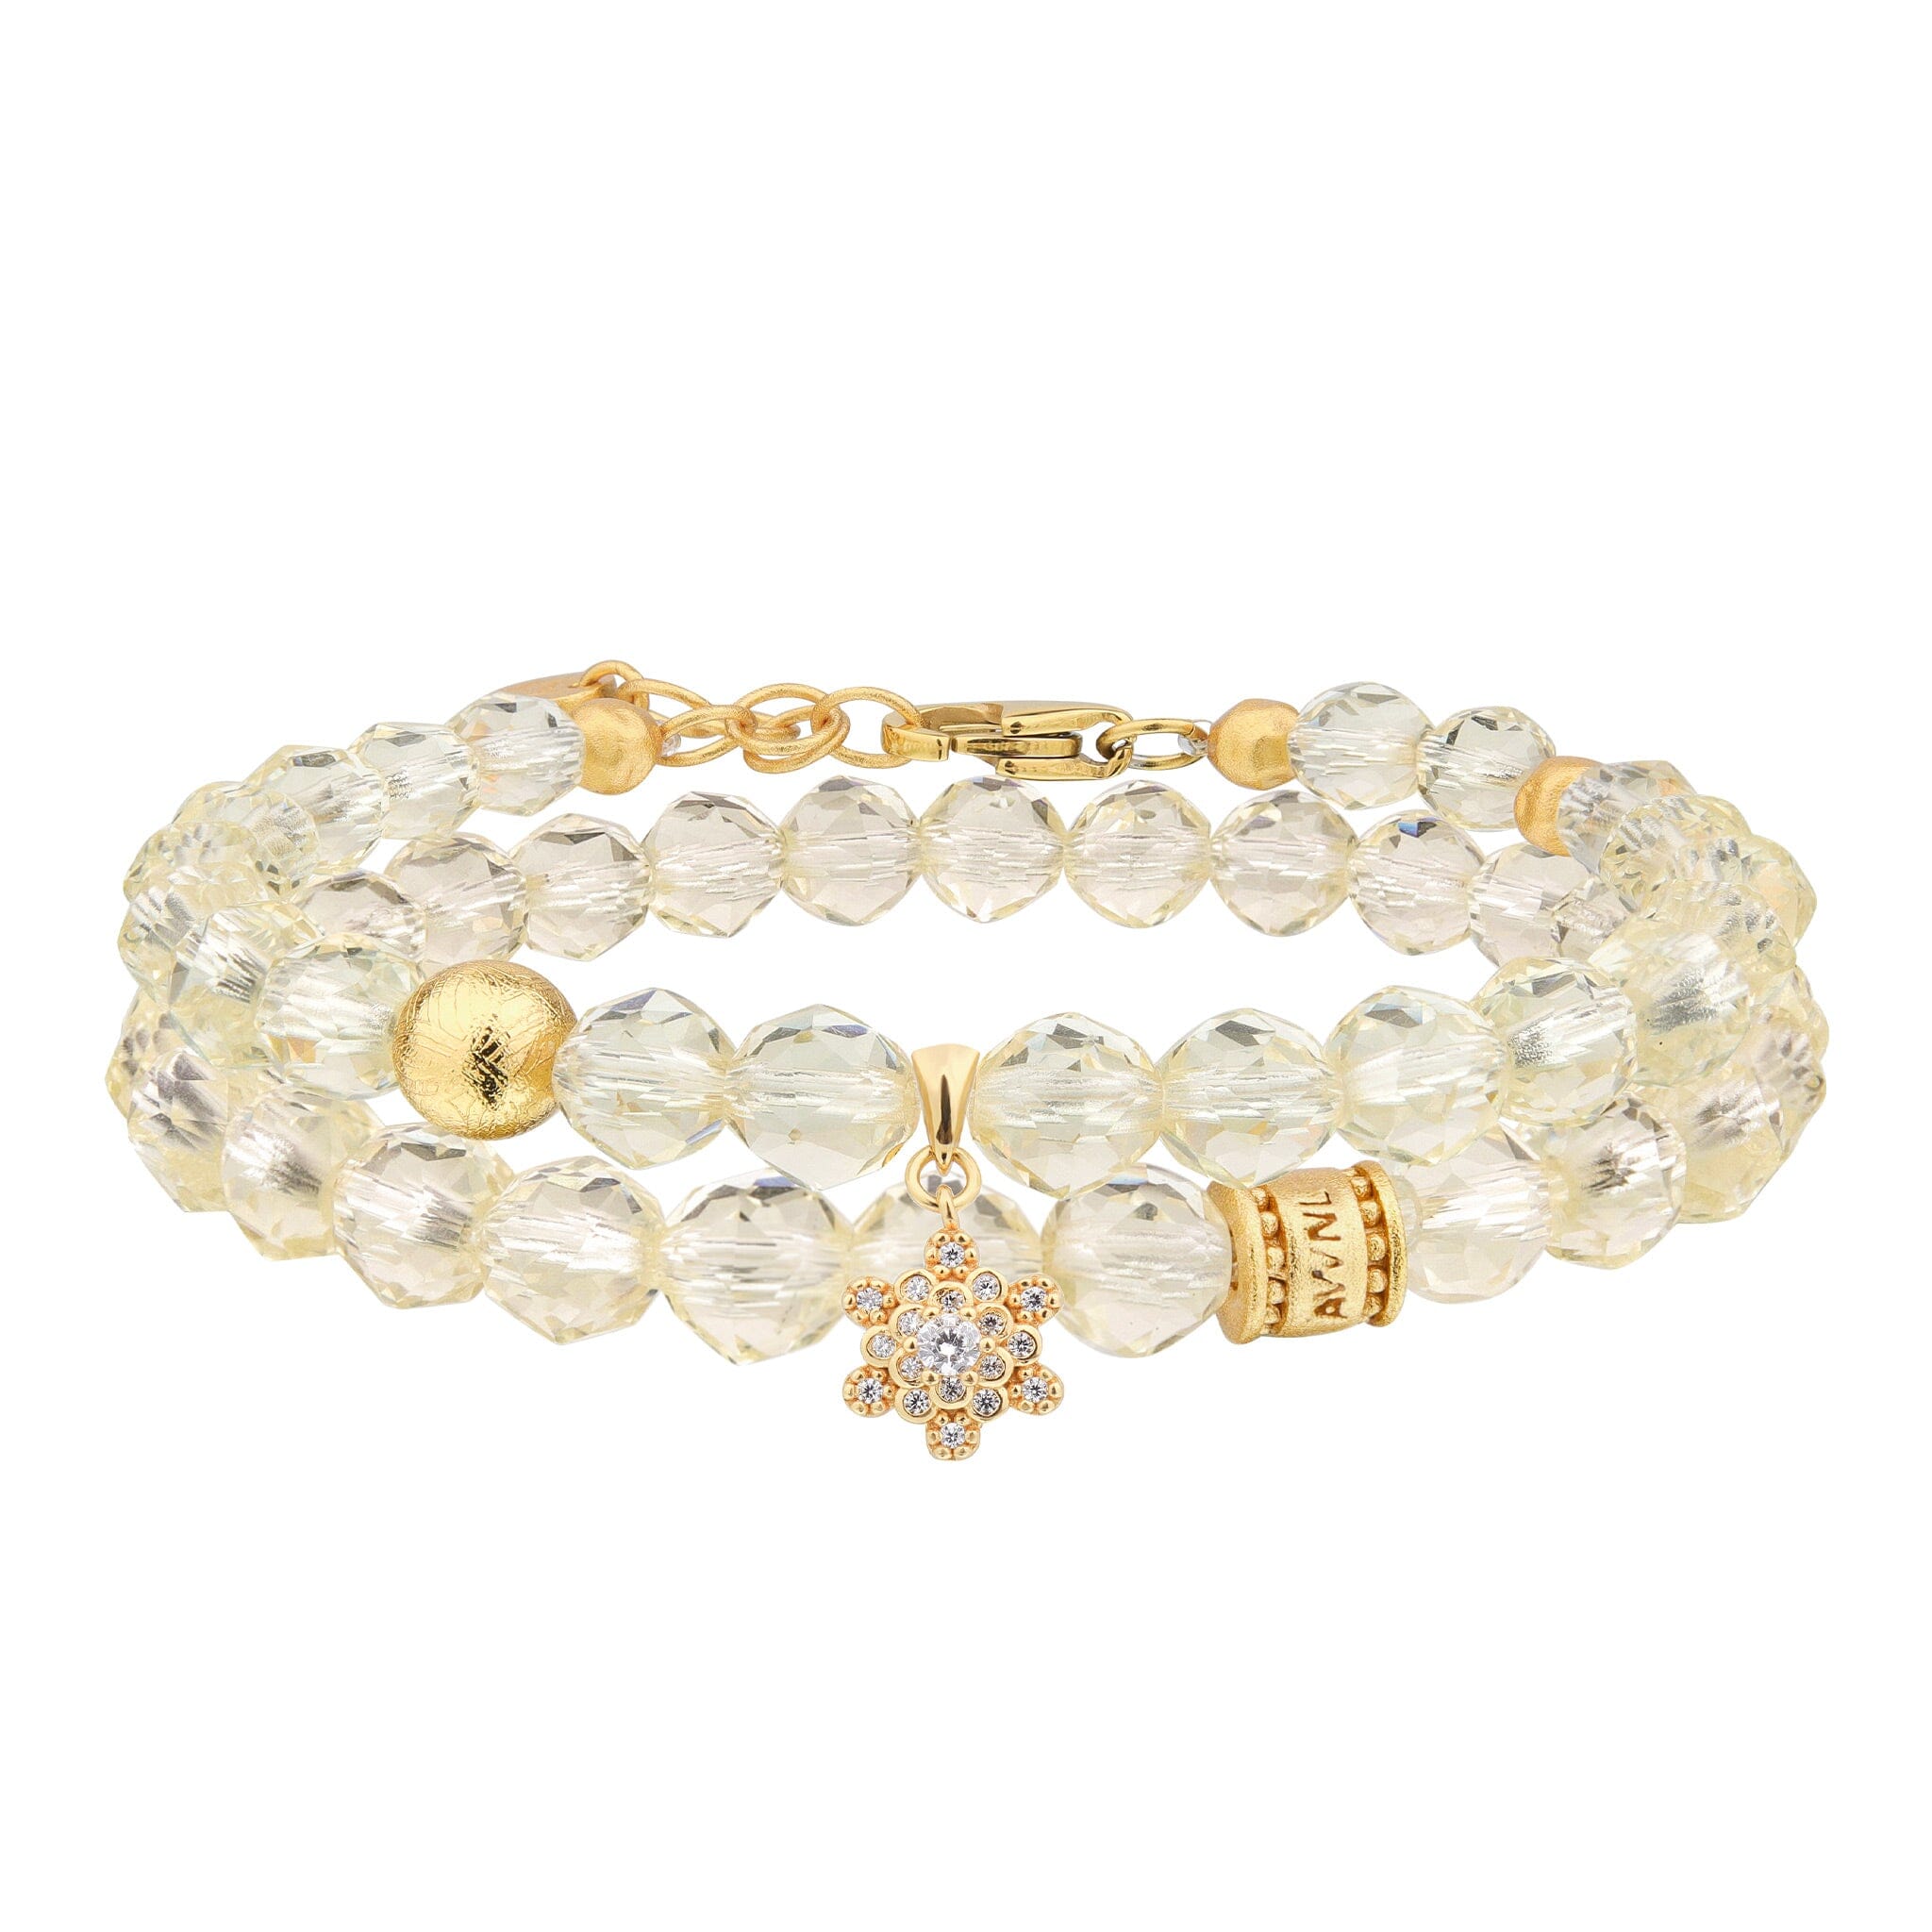 Women's Pansy Stacked Bracelet with Meteorite and Clear Quartz WAA FASHION GROUP 